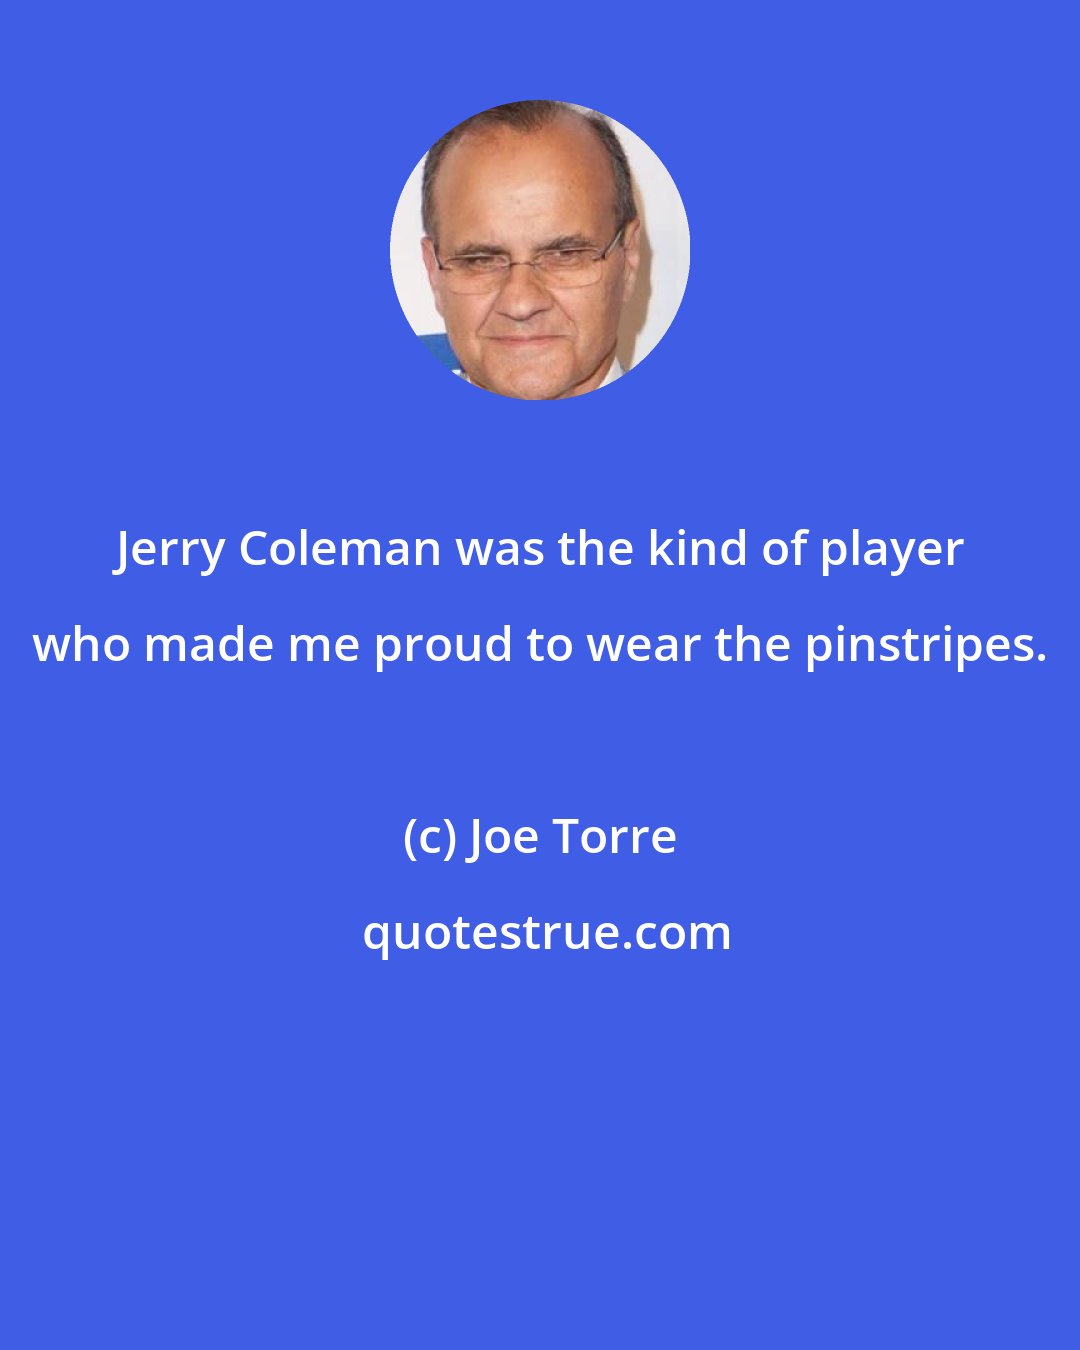 Joe Torre: Jerry Coleman was the kind of player who made me proud to wear the pinstripes.